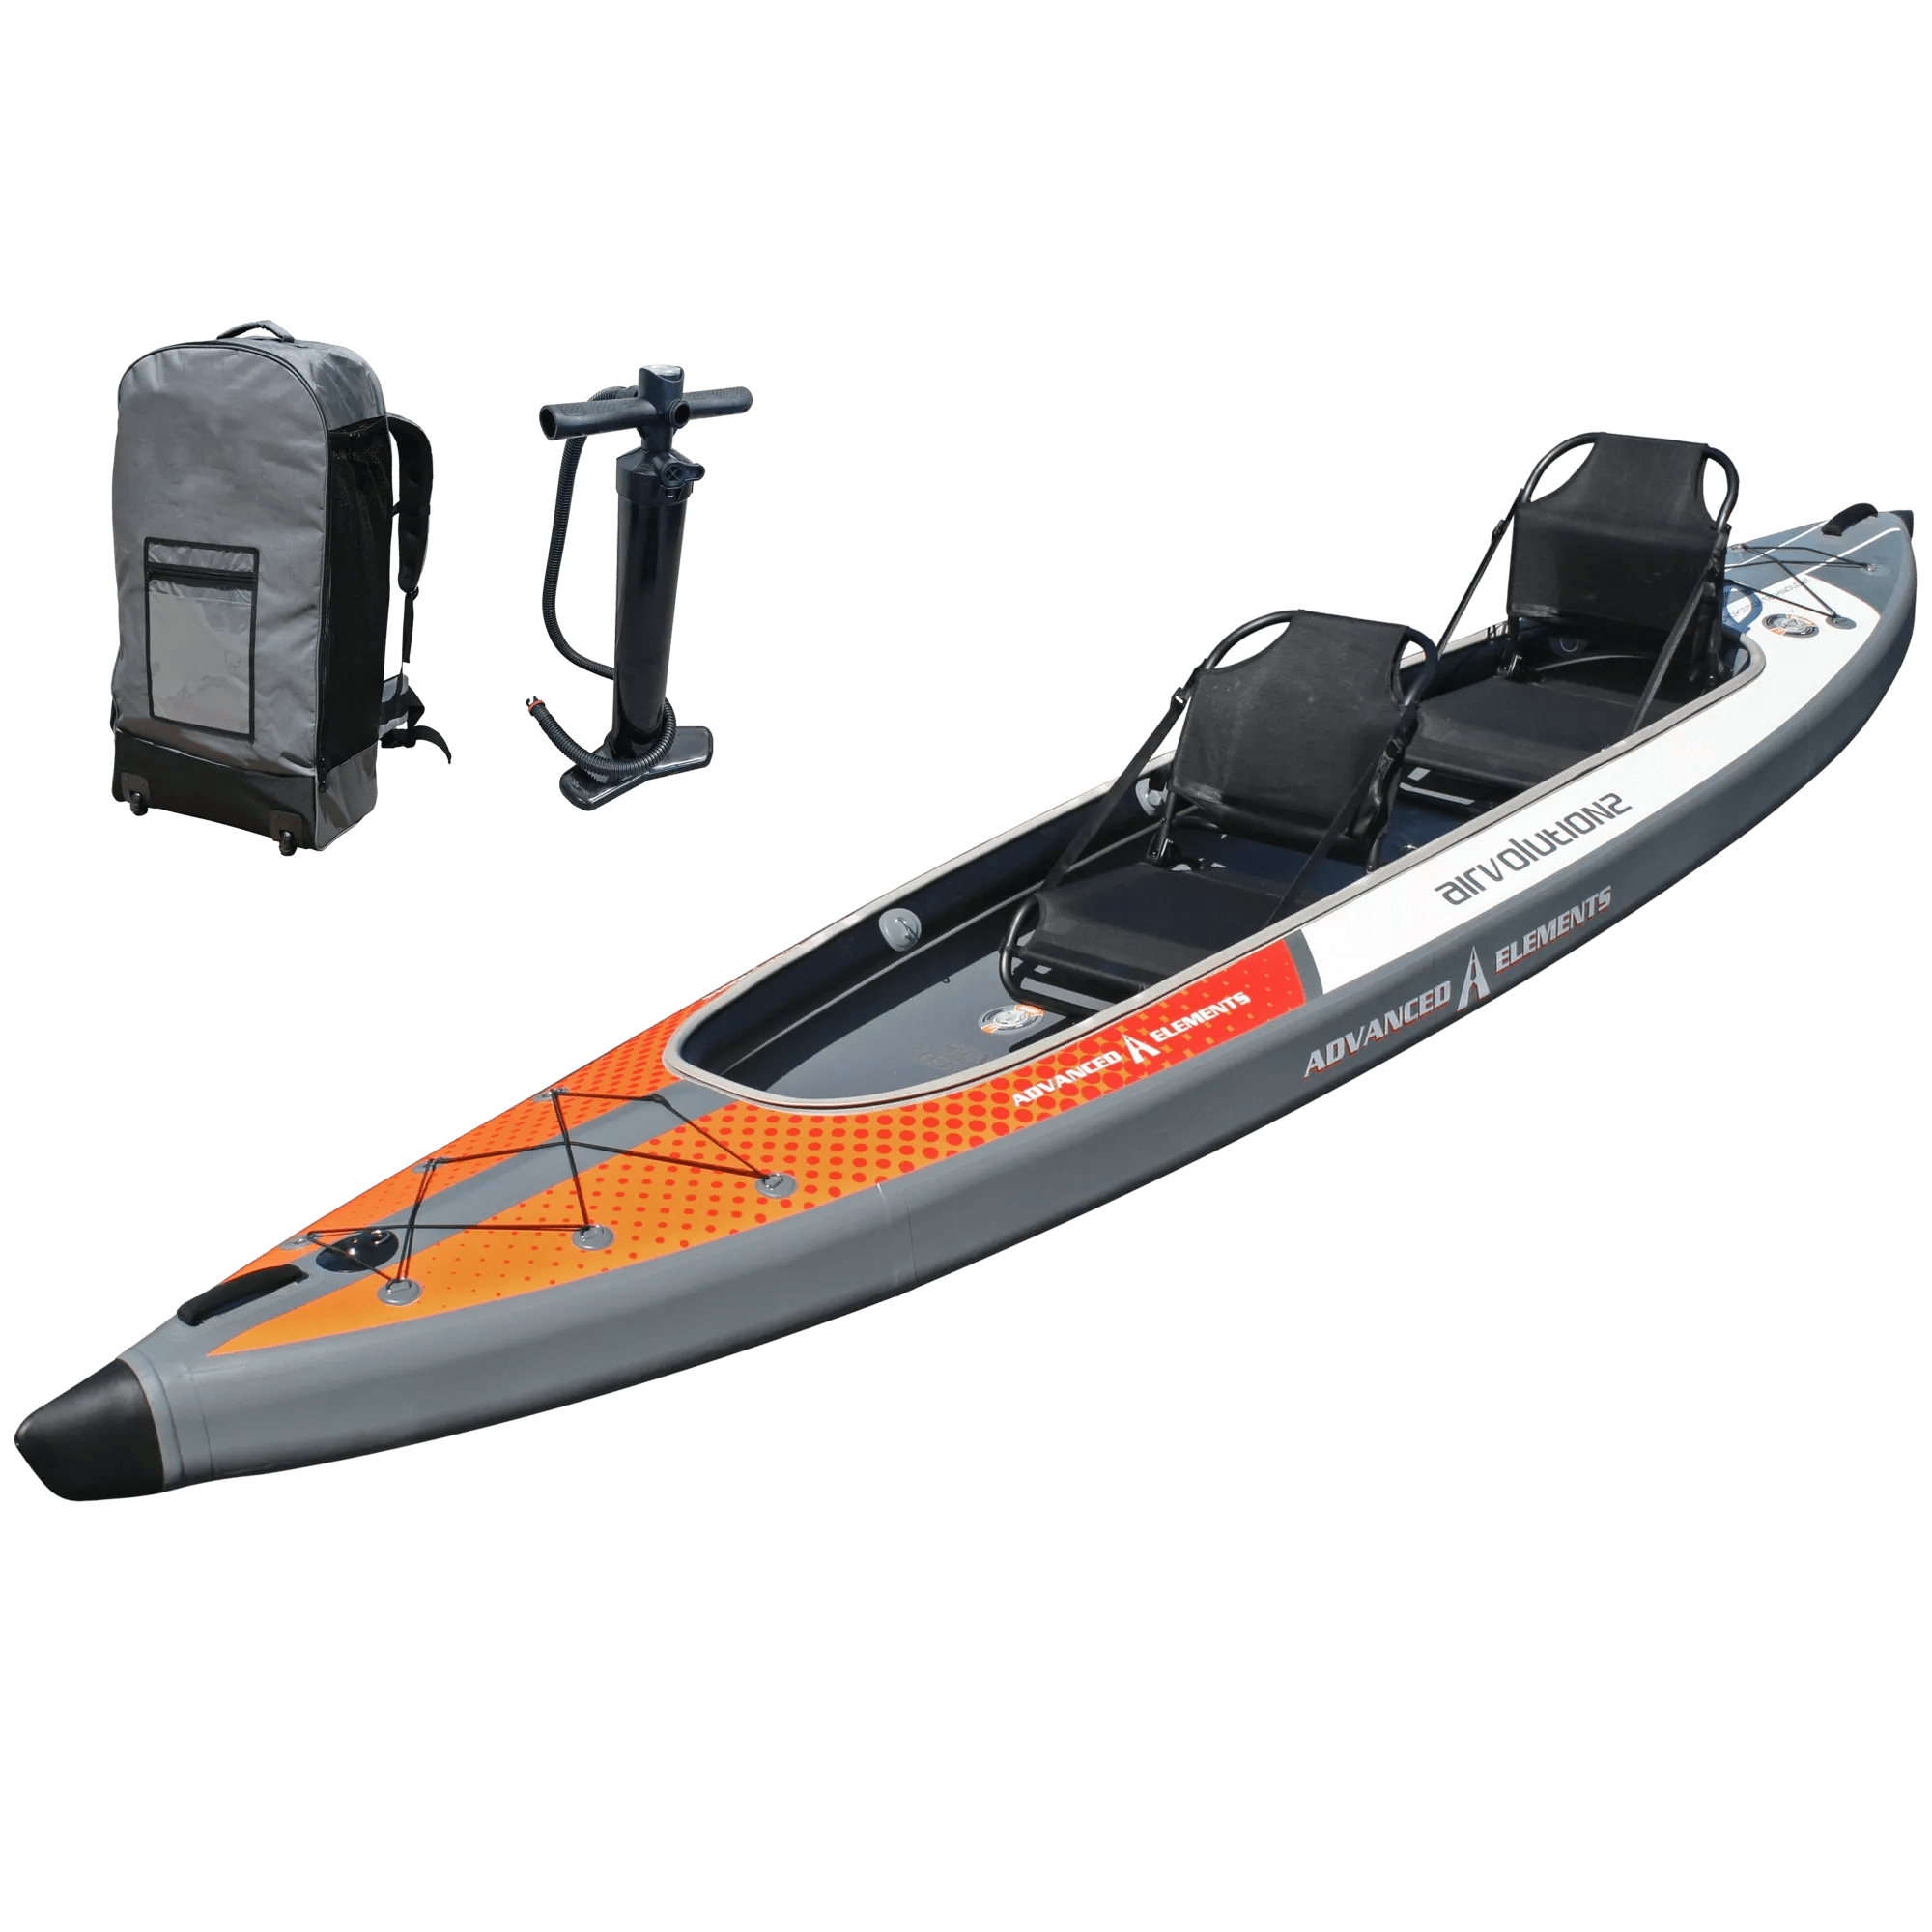 ADVANCED ELEMENTS - AirVolution2™ Pro Recreational Kayak with Pump -  - AE3030-O - ISO 